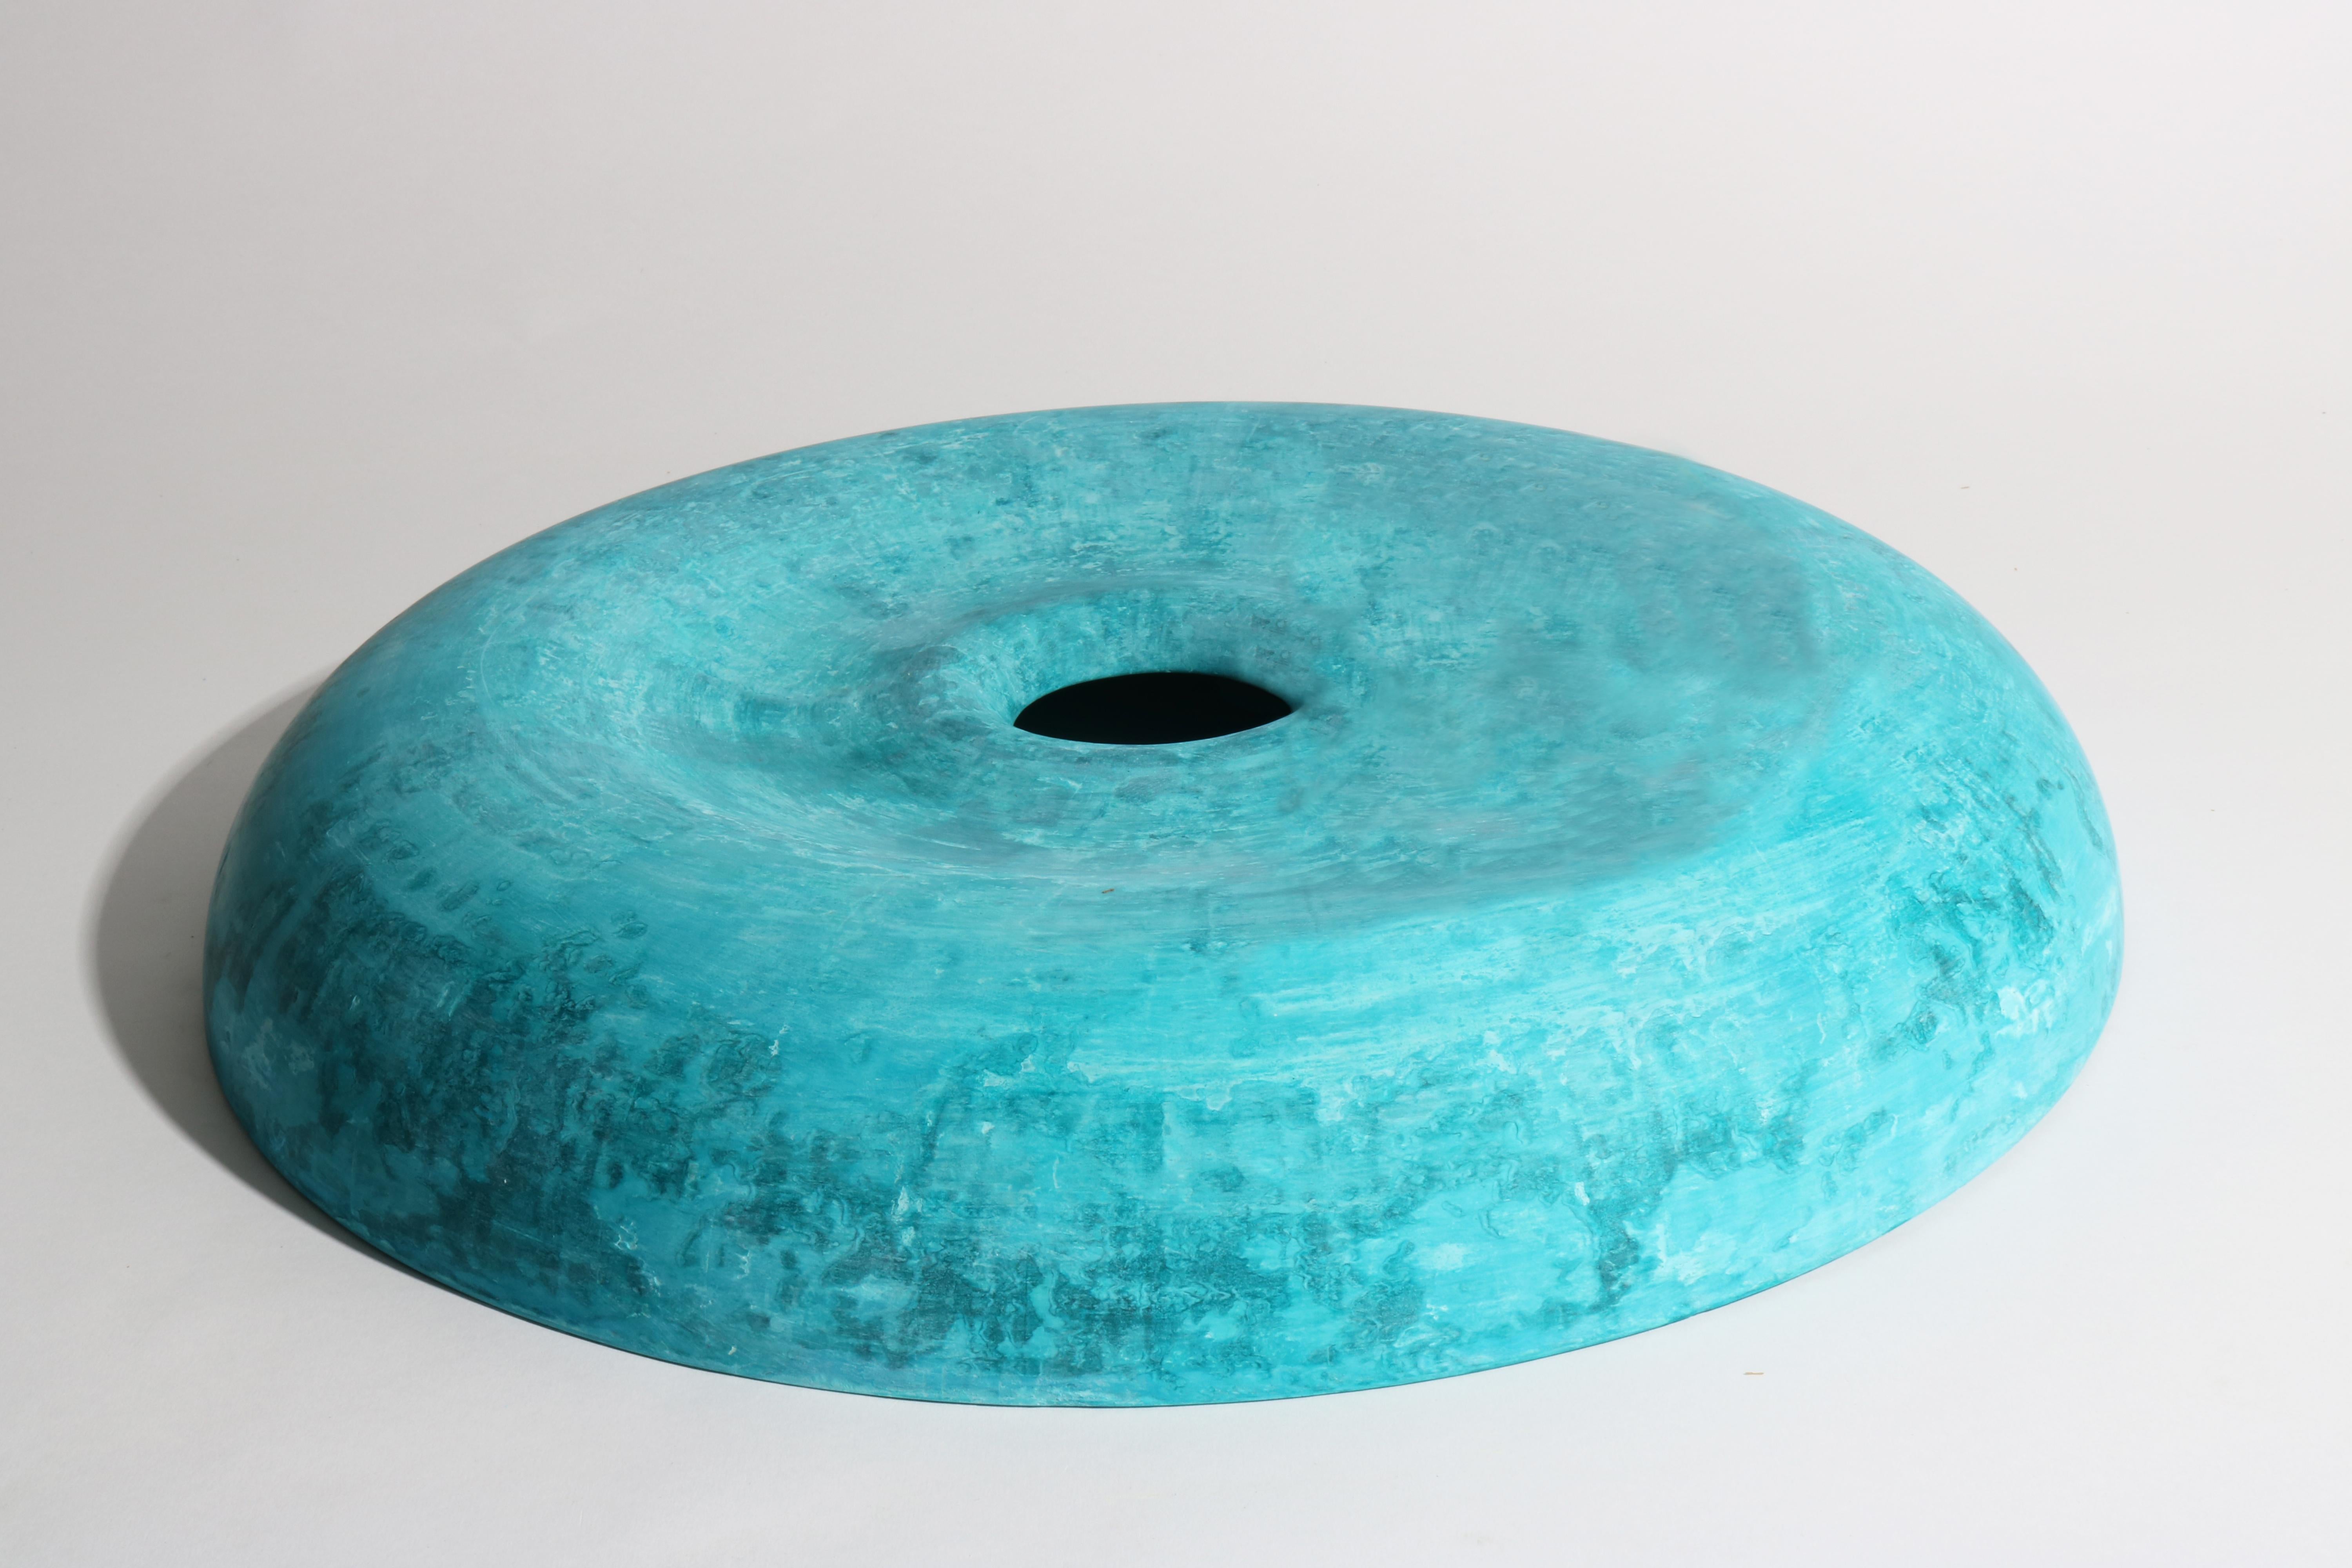 Twirl Bowl Ocean Blue by Lenny Stöpp
Material: Mineral powder & water-based acrylic hardener
Finish: Water-based coating
Dimensions: ± 8 x 52 cm
Weight: ±5kg

All pieces are handmade and therefore unique.
Because I use the running cornice technique